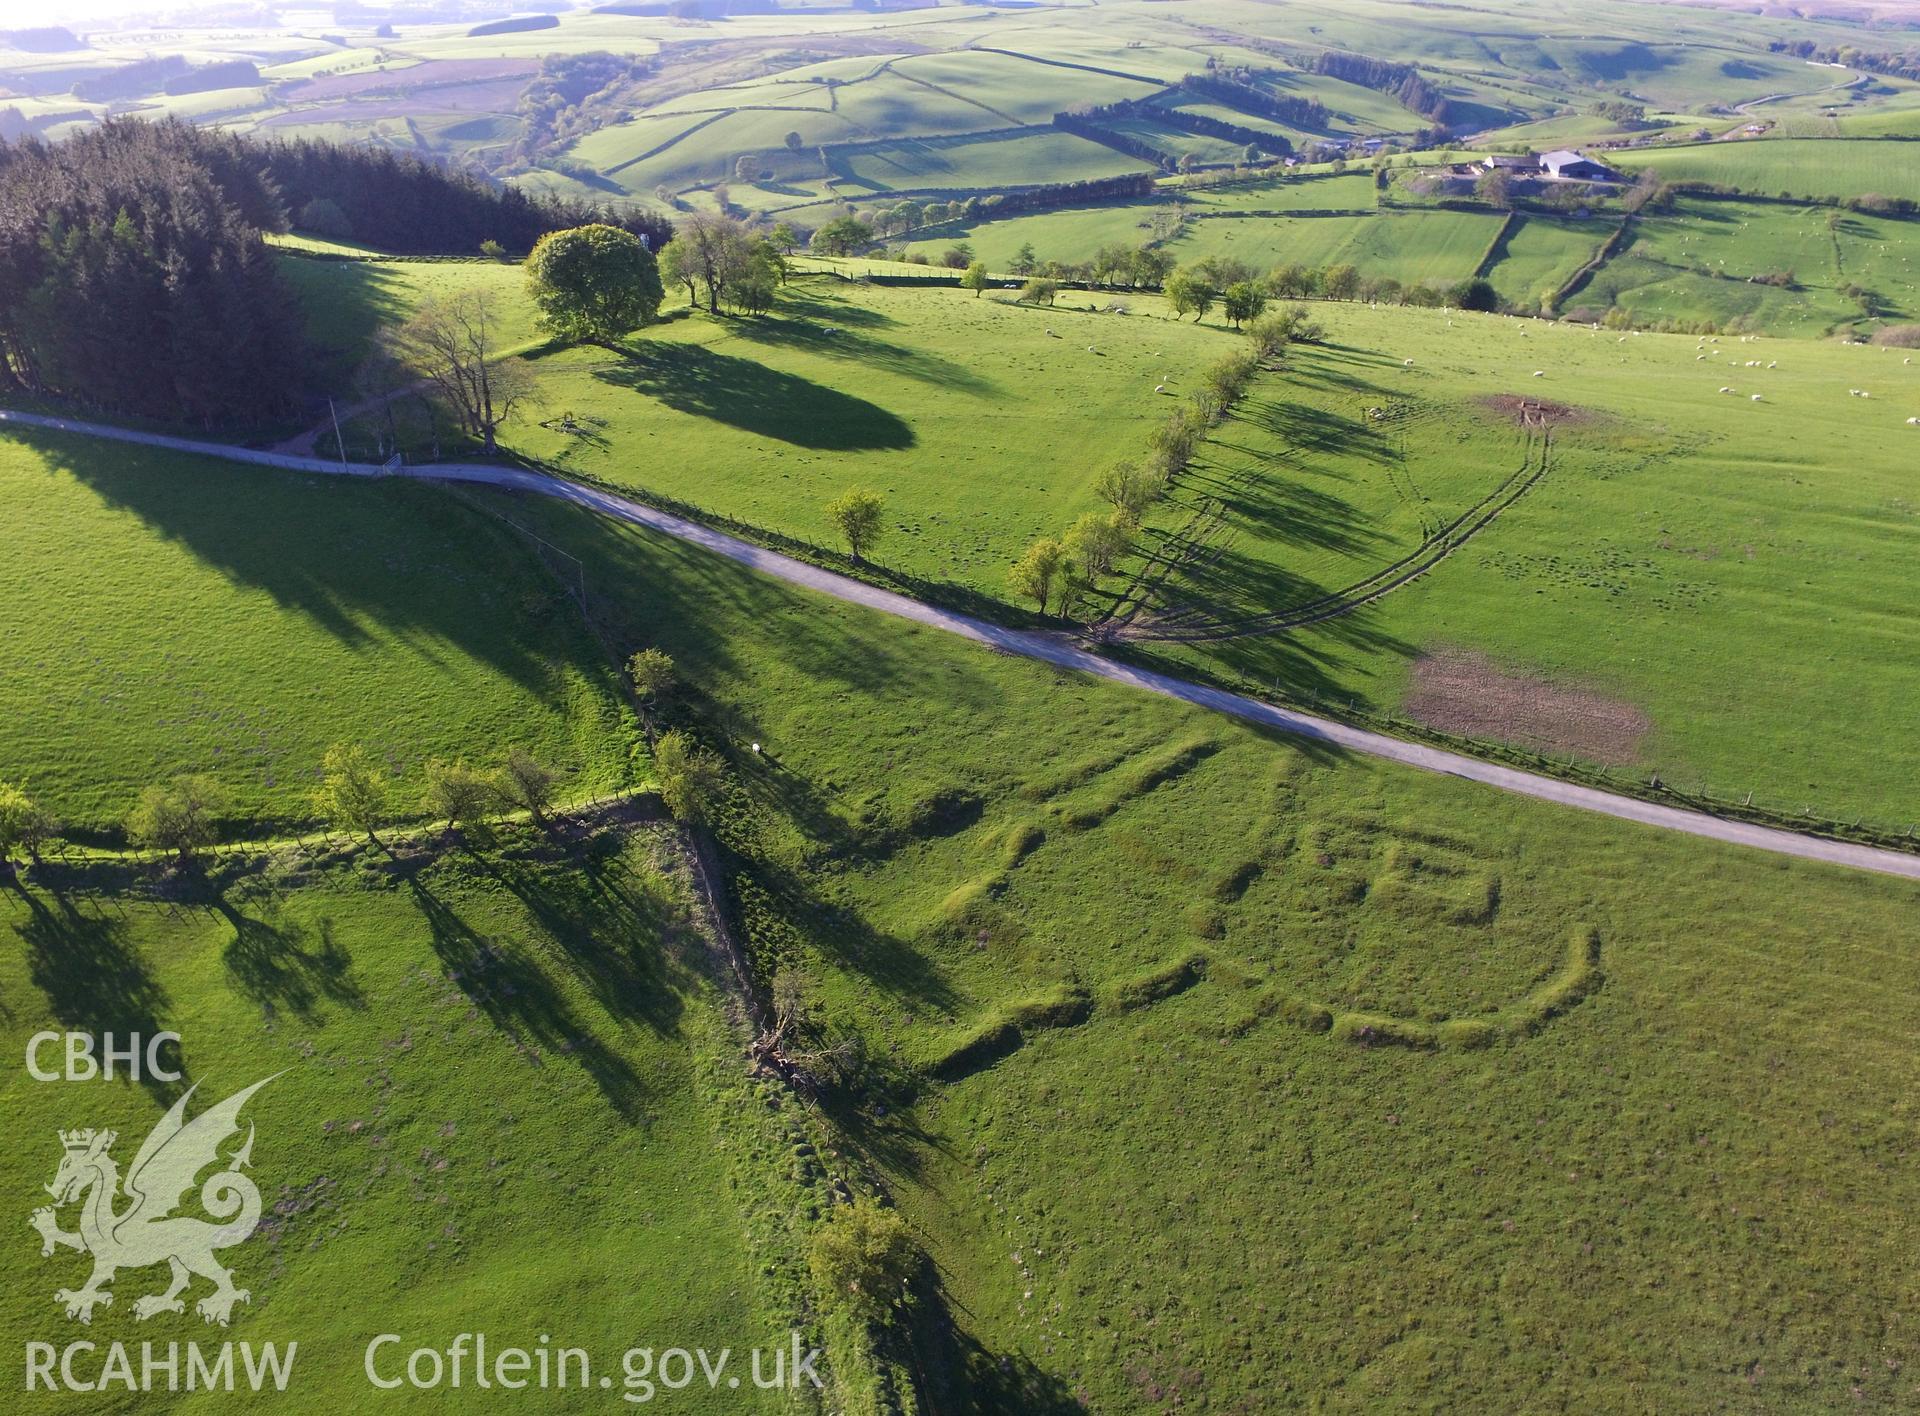 Colour photo showing aerial view of deserted rural settlement at Fron Top, Llanbister, taken by Paul R. Davis, 13th May 2018.